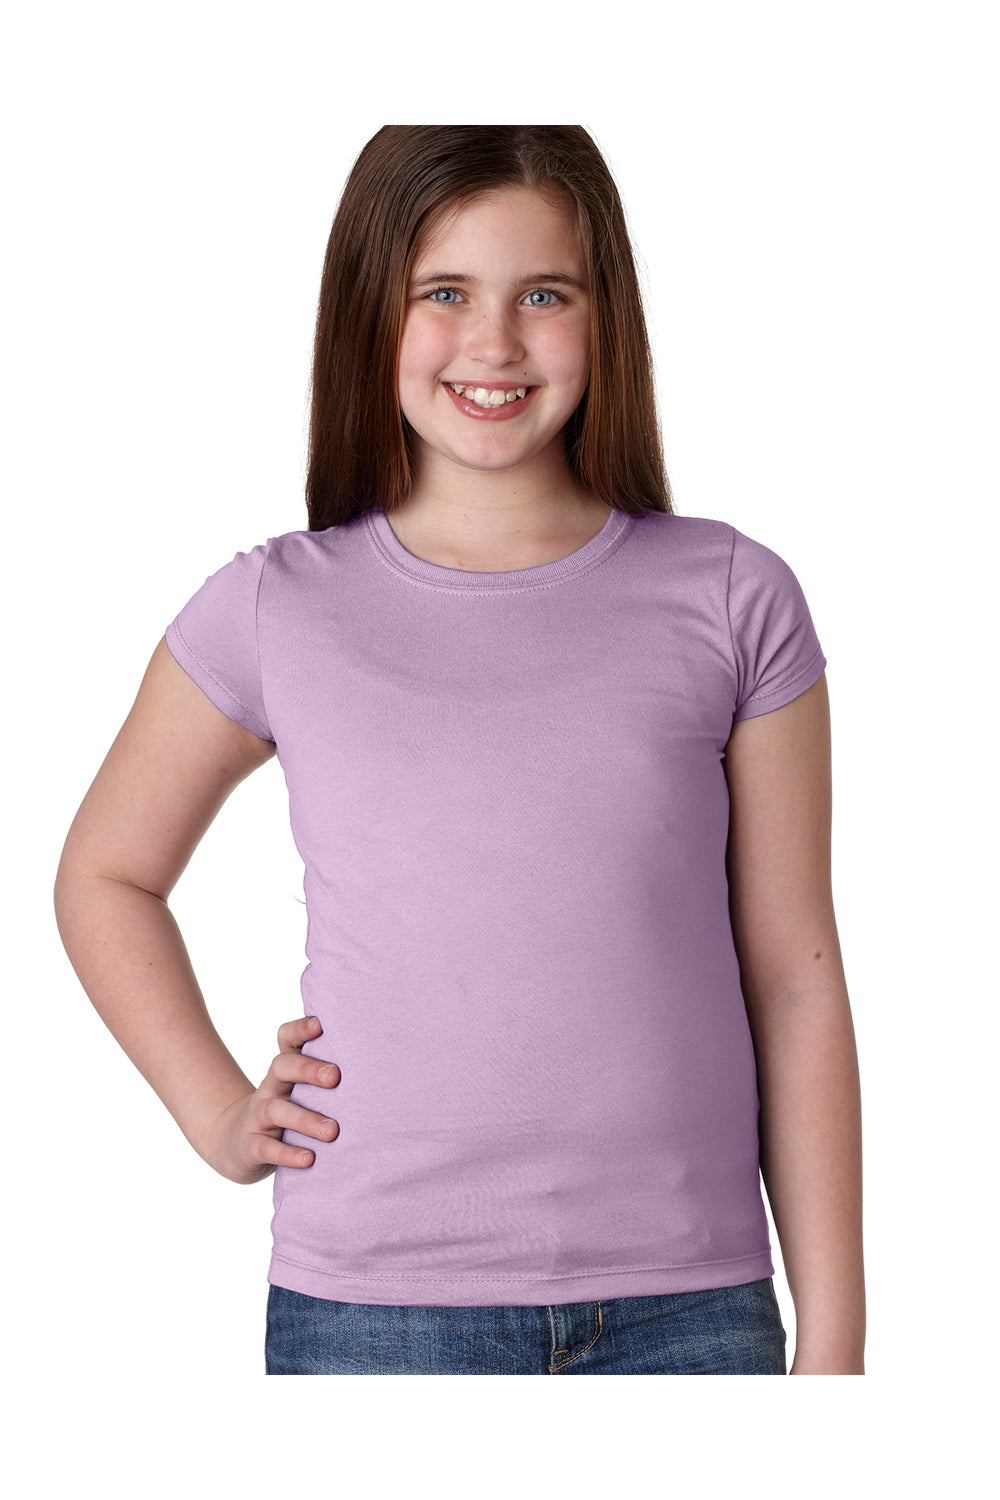 Next Level N3710 Youth Princess Fine Jersey Short Sleeve Crewneck T-Shirt Lilac Pink Front